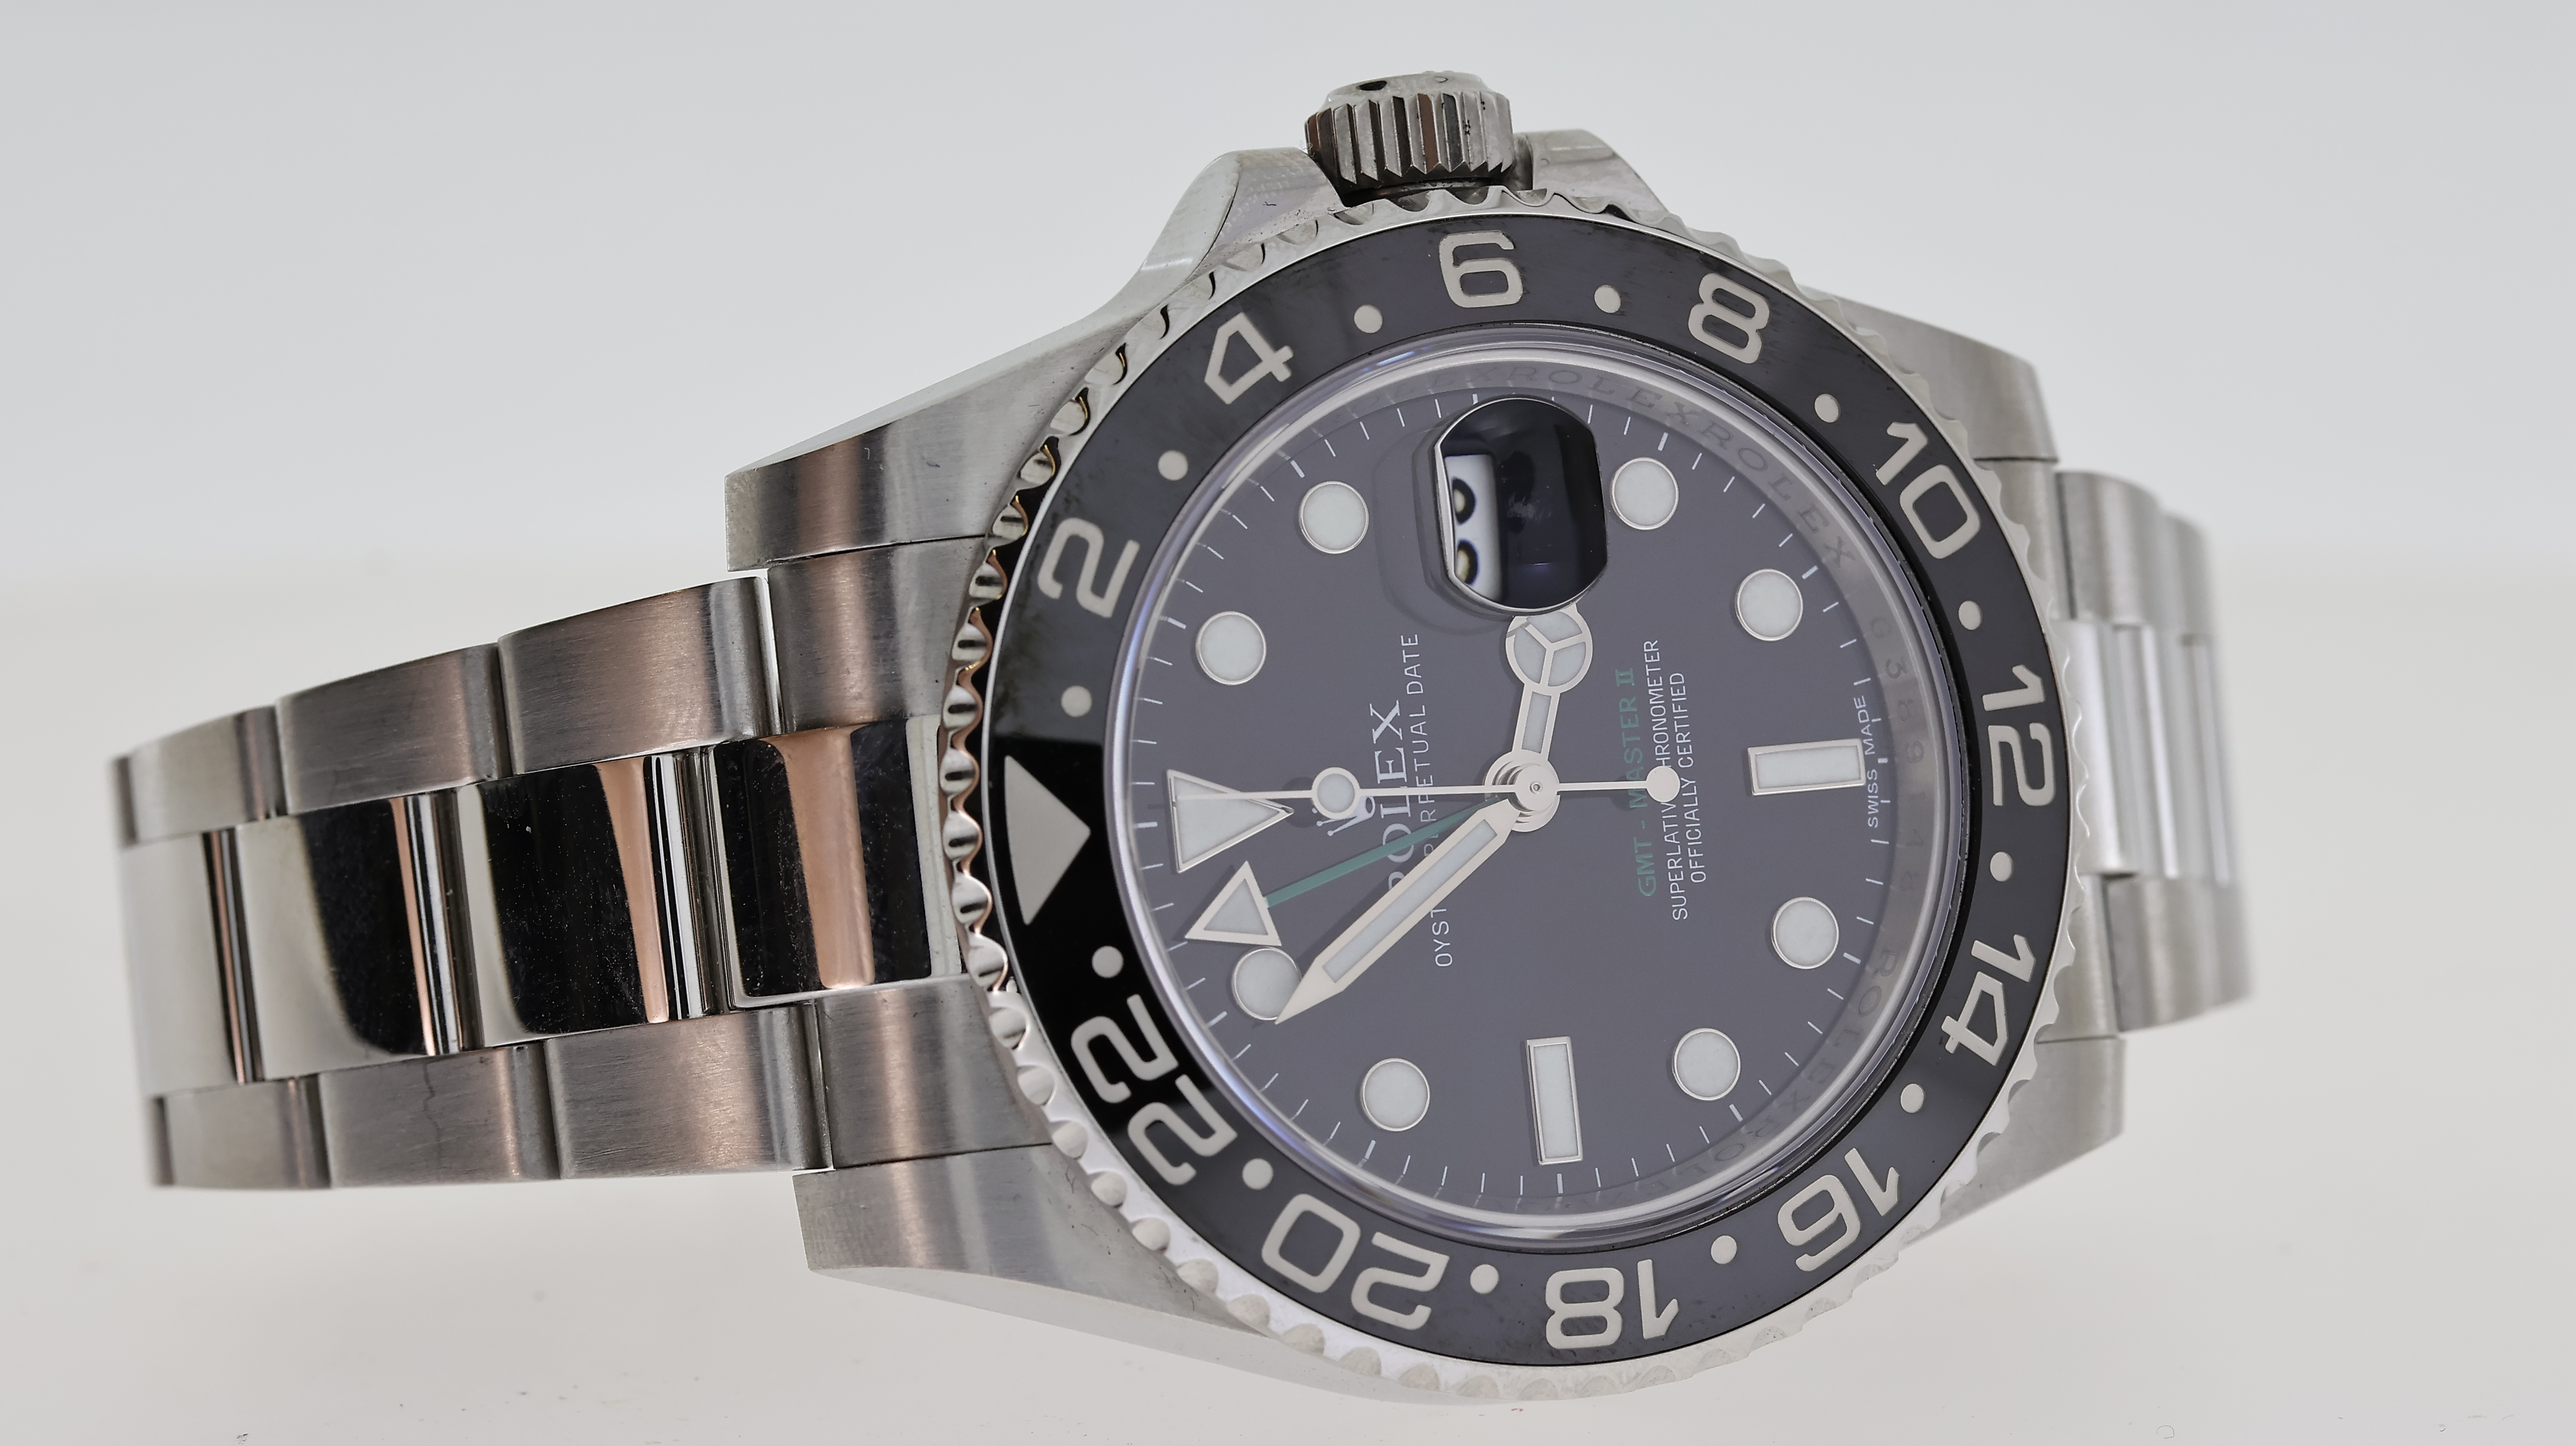 ROLEX GMT MASTER II REFERENCE 116710 - Image 2 of 10